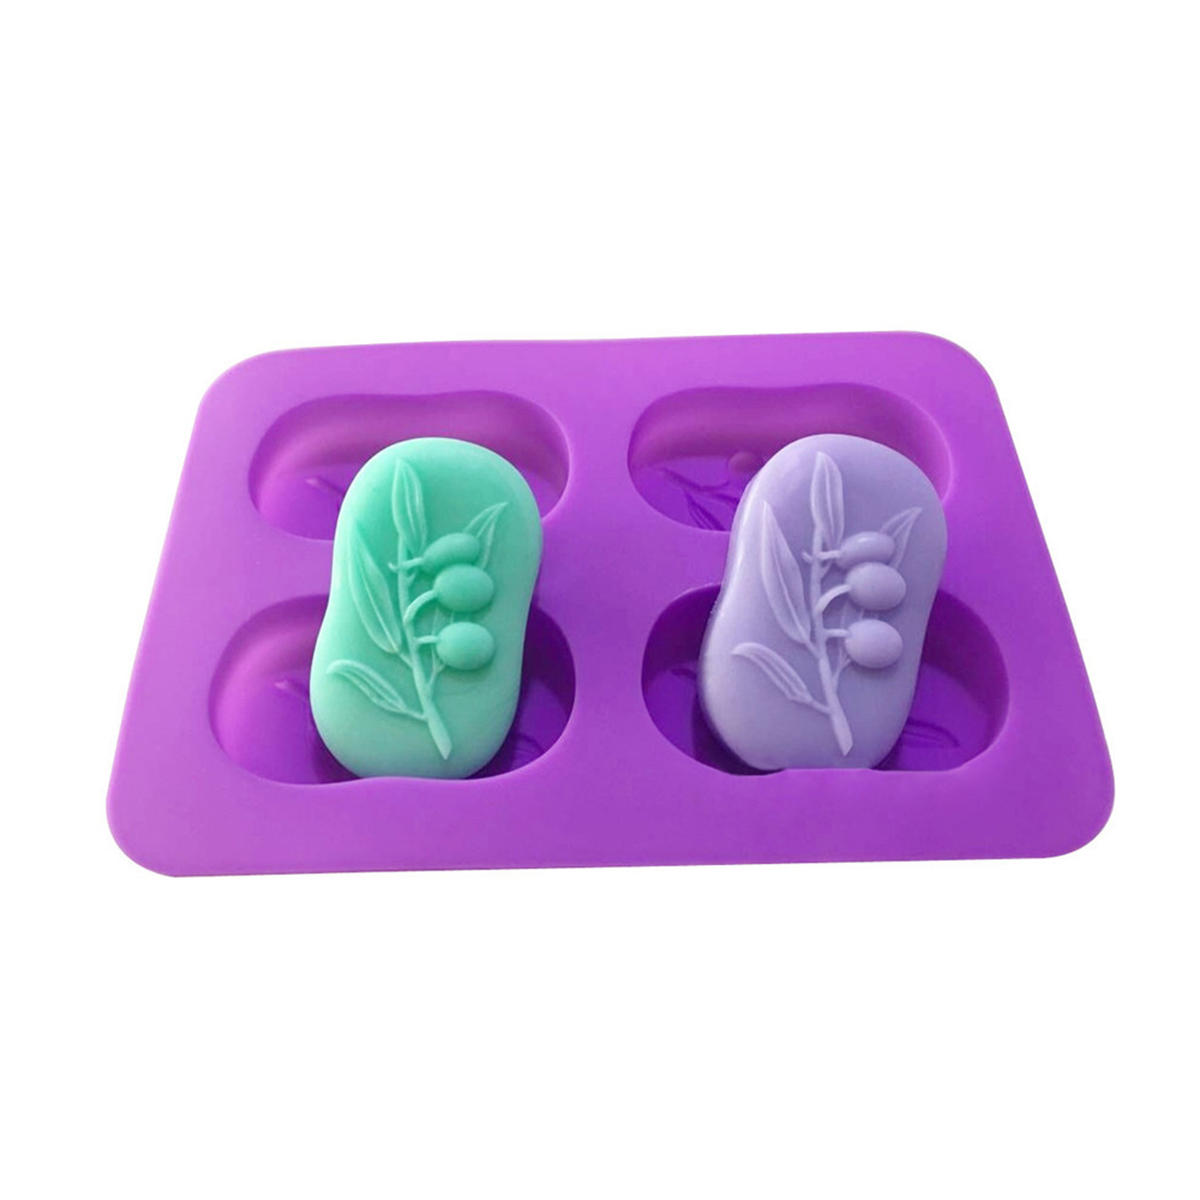 

Olive Tree Soap Mold DIY Cake Chocolate Candy Sugar Cookie Ice Mould Baking Tool